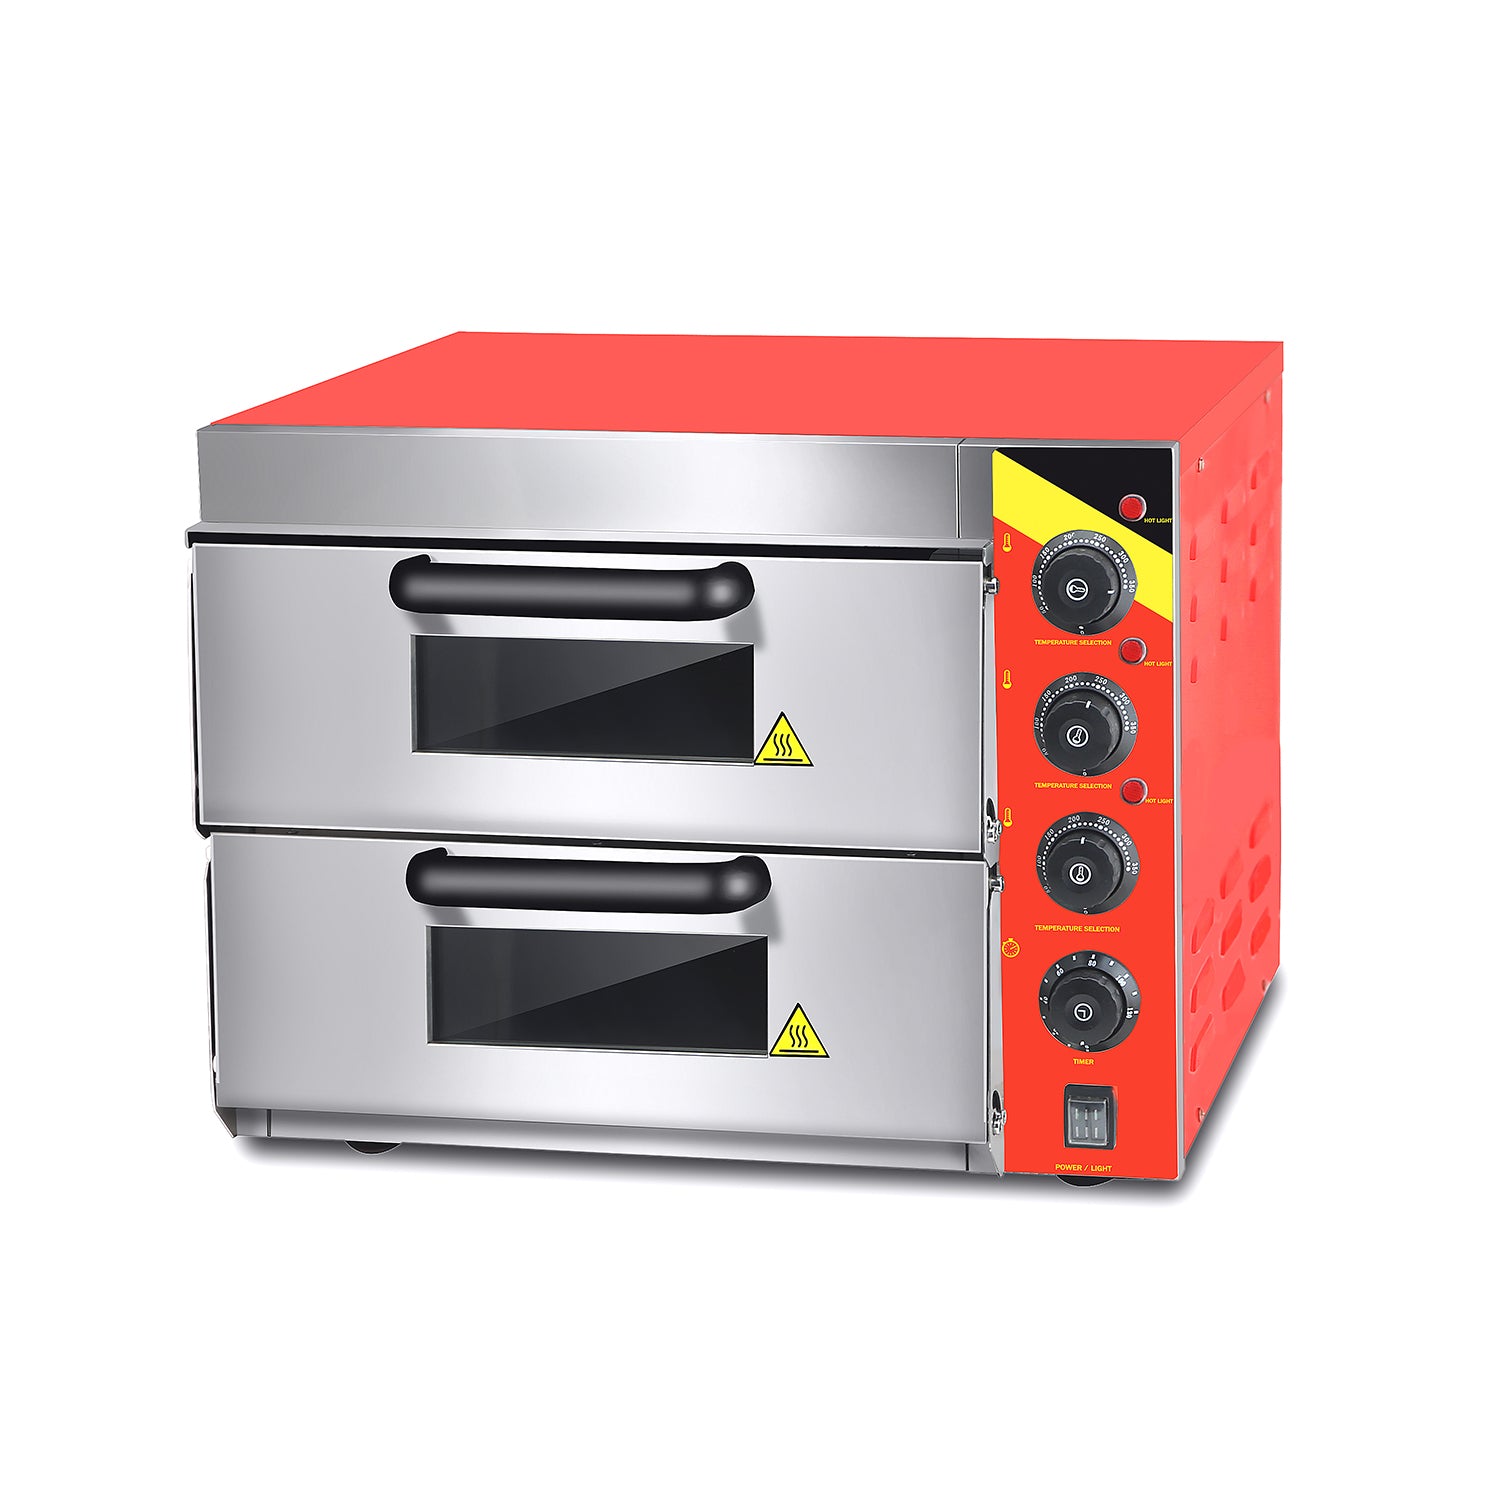 ALDKitchen Pizza Maker | Electric Pizza Oven | 2 Pcs | Stainless Steel | 110V